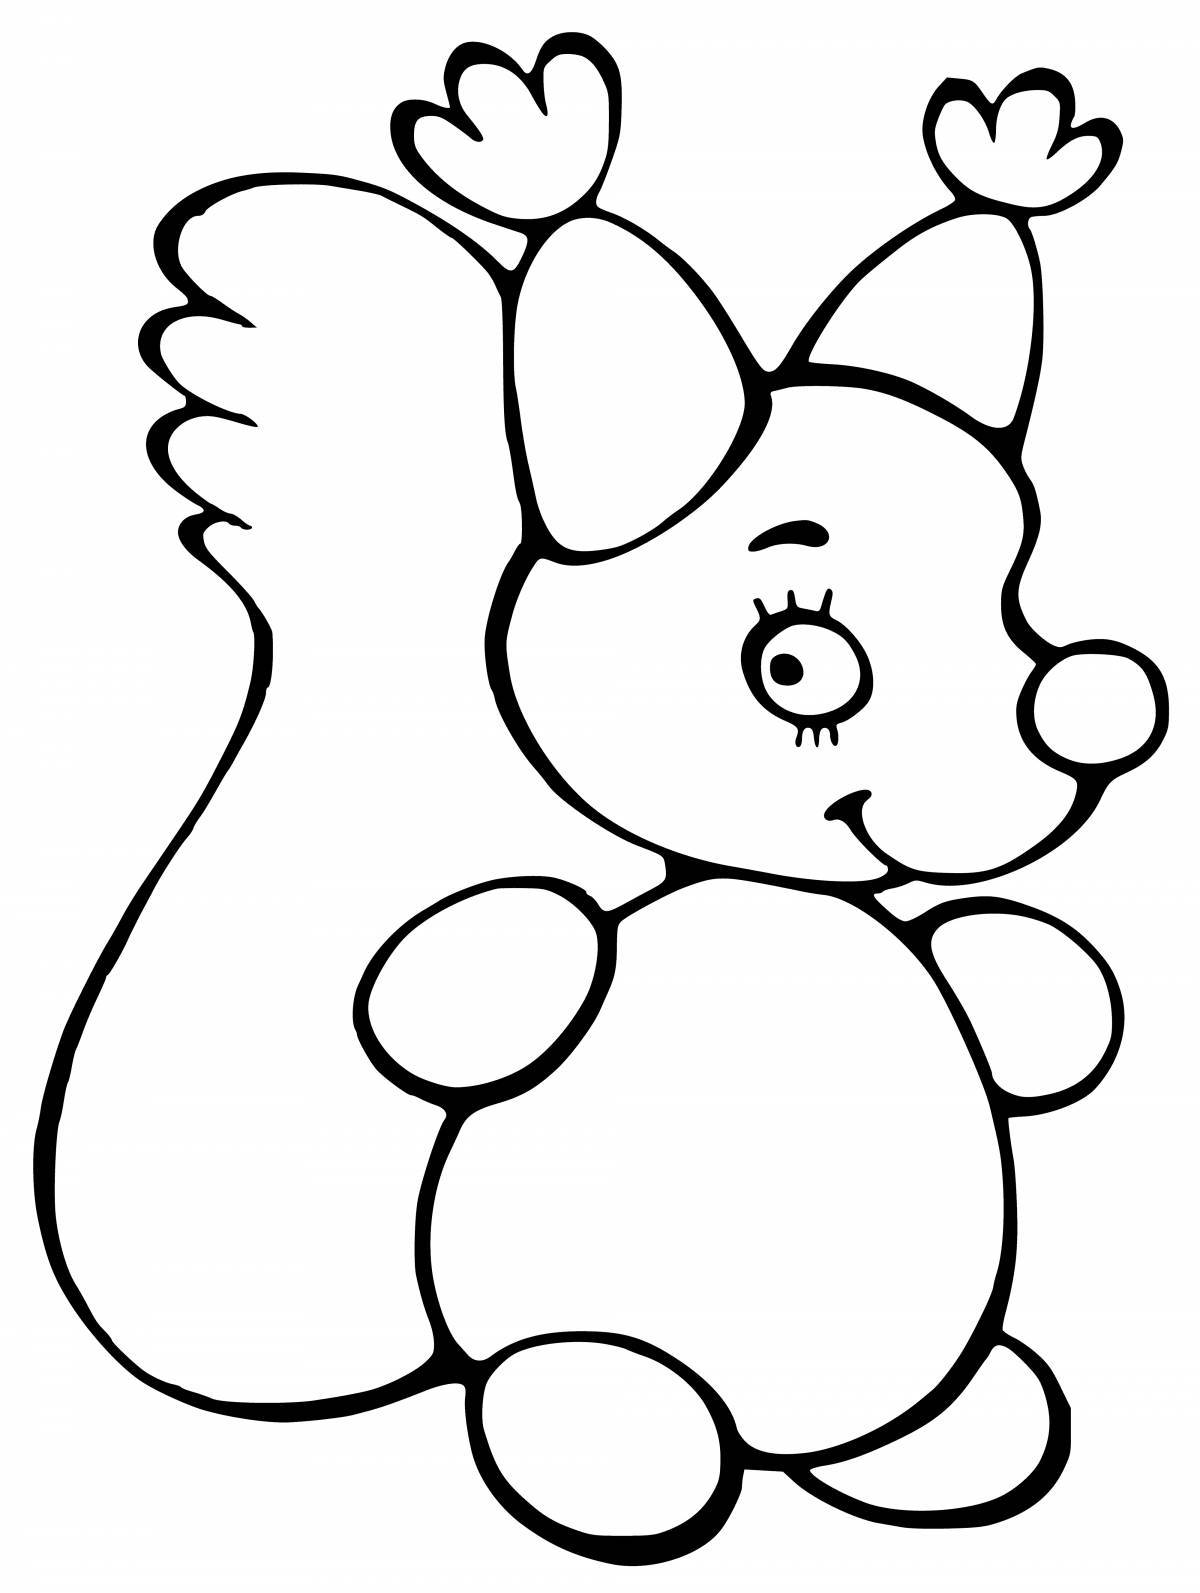 Color Explosion Coloring Page for Toddlers 2-3 years old